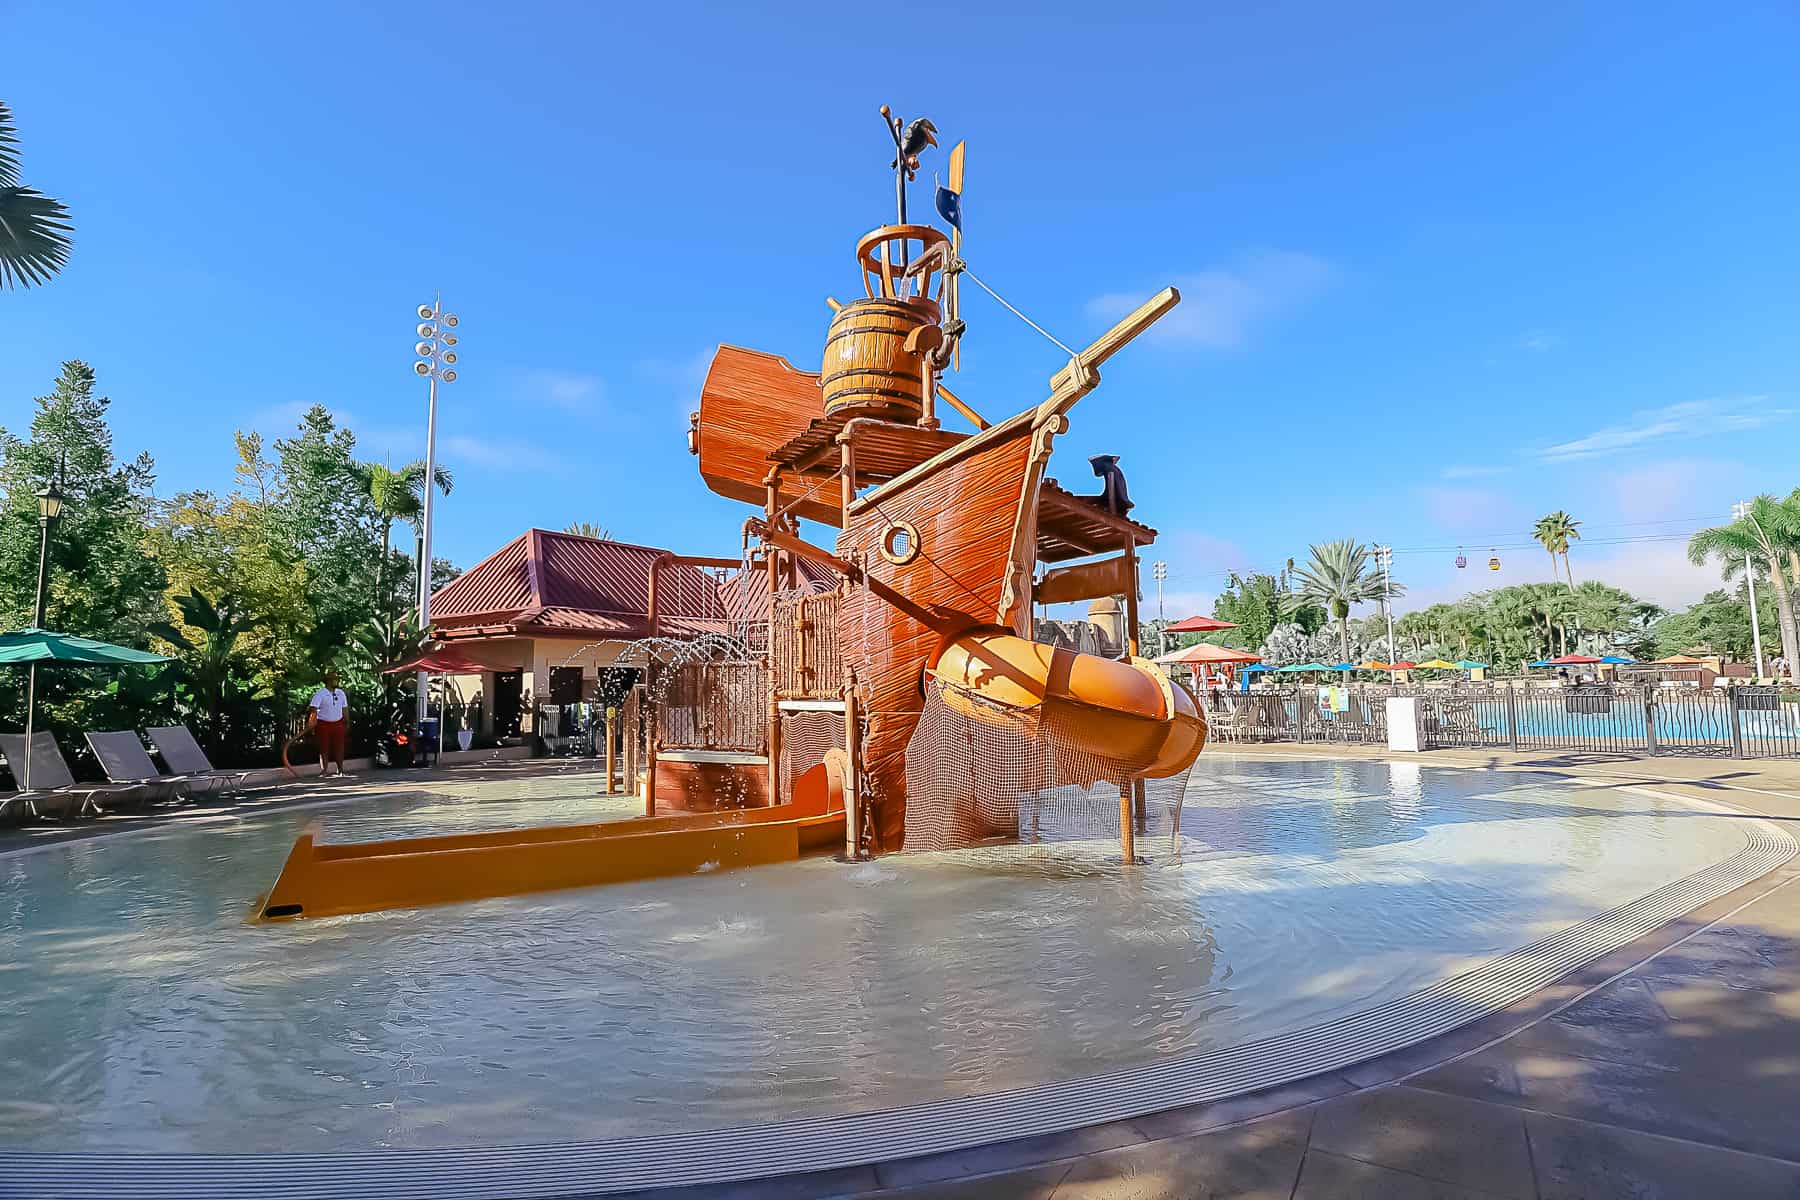 aquatic play area that looks like a Shipwreck with splash elements